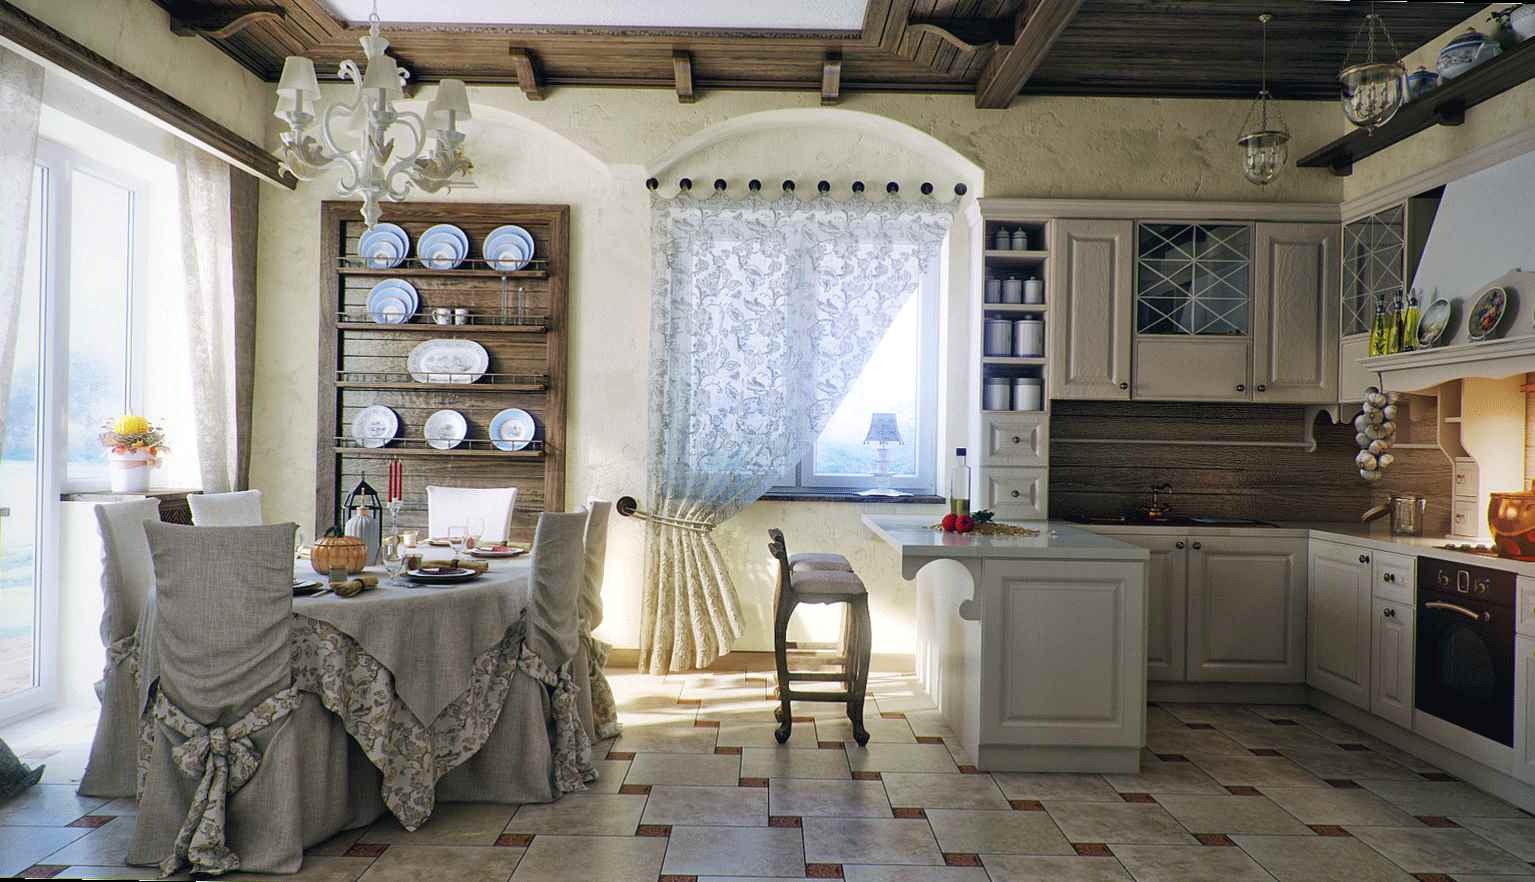 An example of a beautiful rustic style kitchen